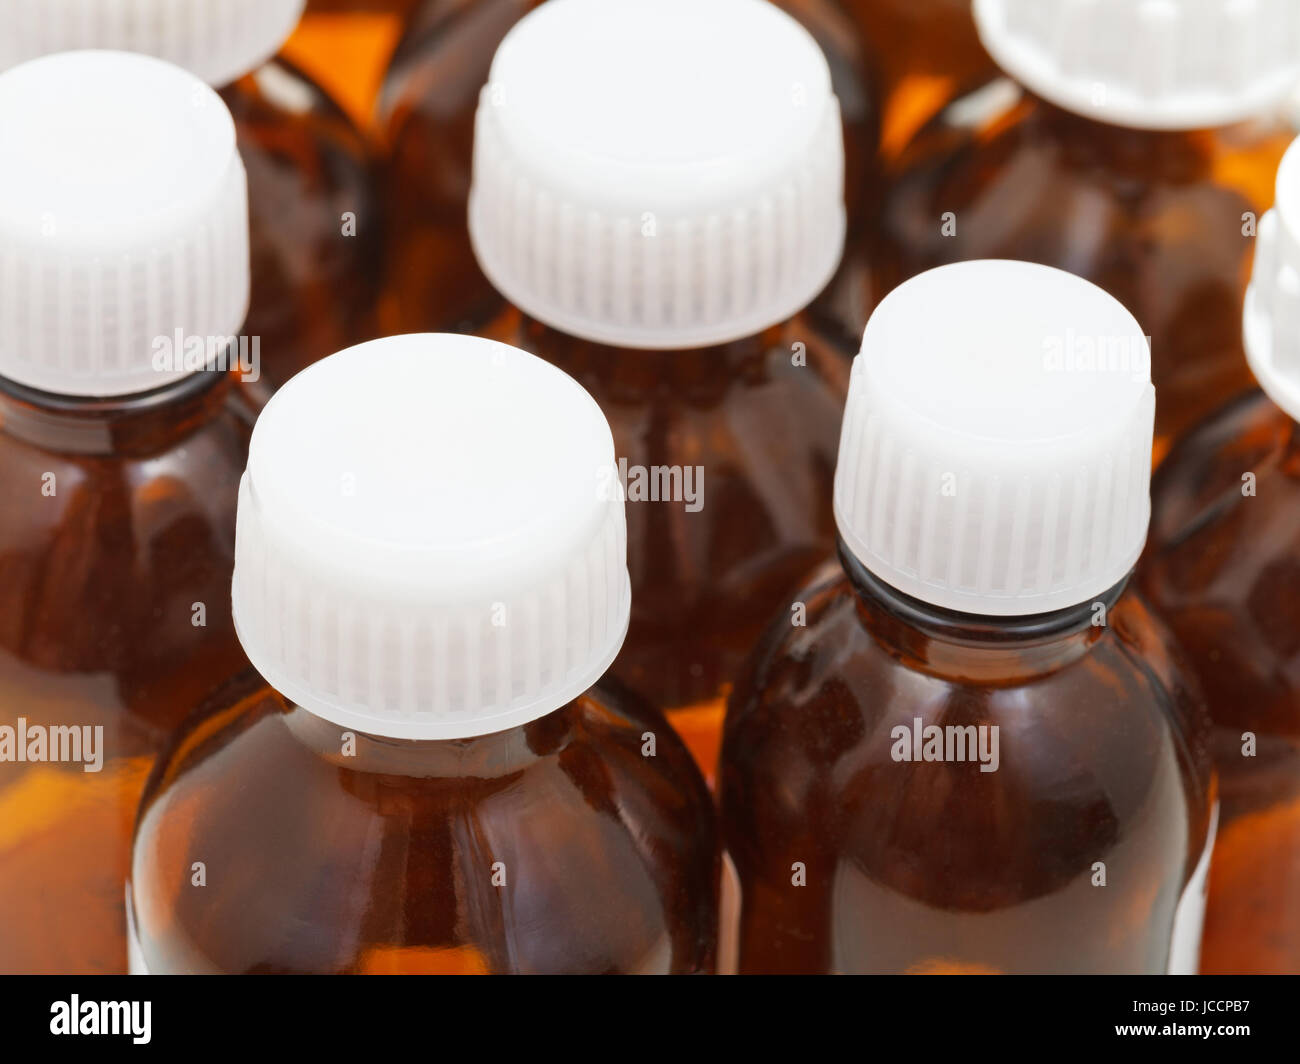 Download Many Little Closed Amber Glass Oval Pharmacy Bottles Close Up Stock Photo Alamy Yellowimages Mockups